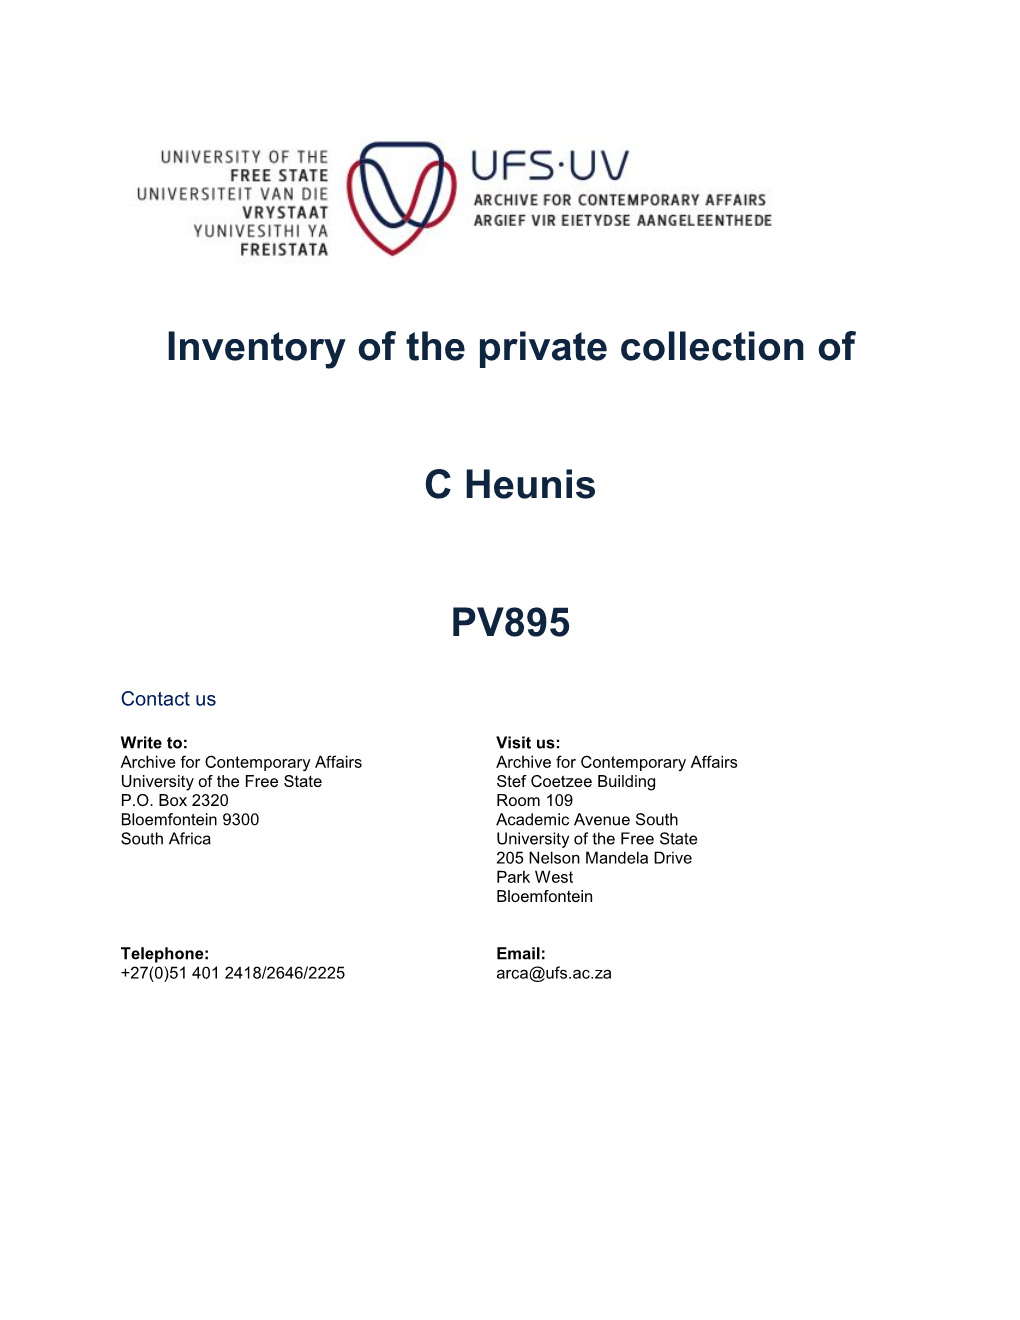 Inventory of the Private Collection of C Heunis PV895